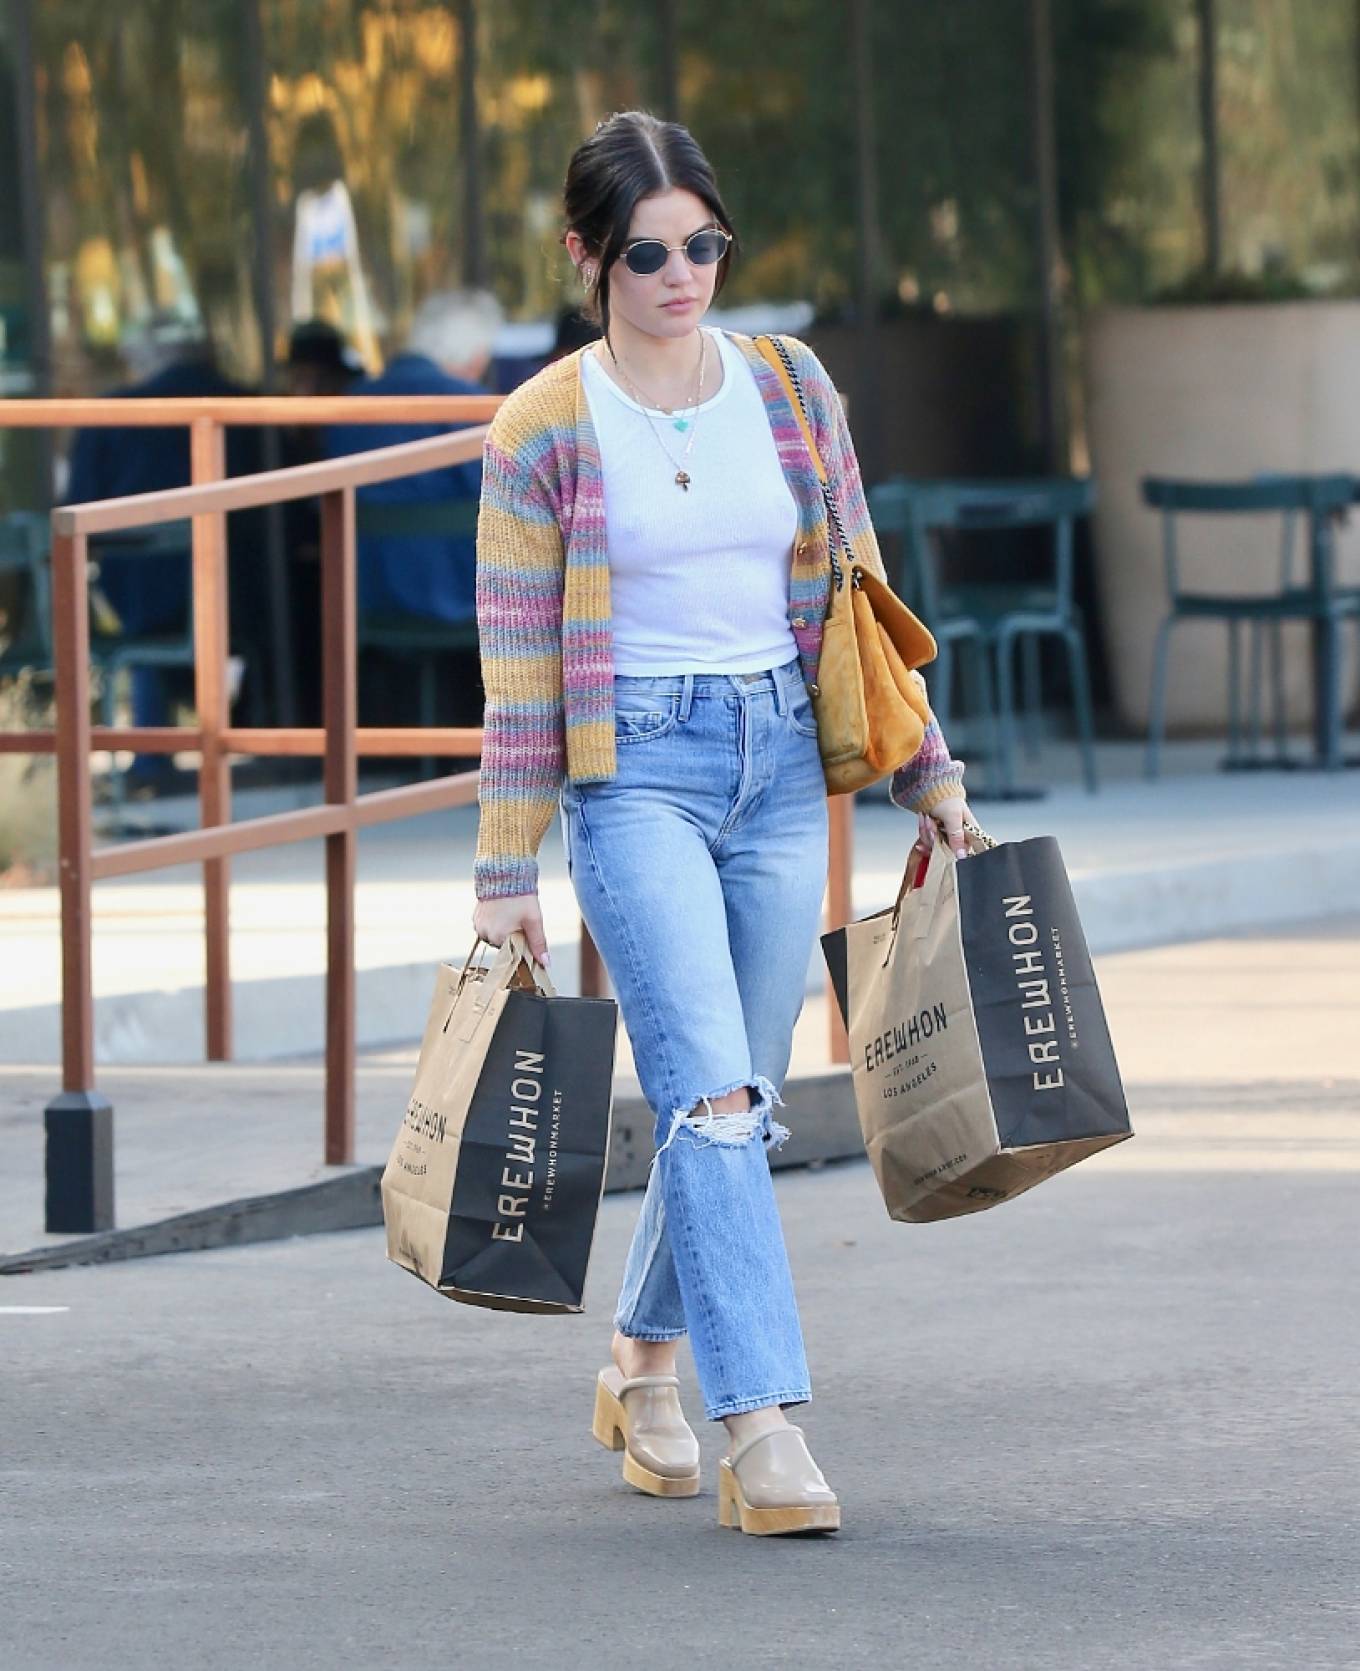 Lucy Hale 2021 : Lucy Hale – Shopping at Erewhon Market in Studio City-09